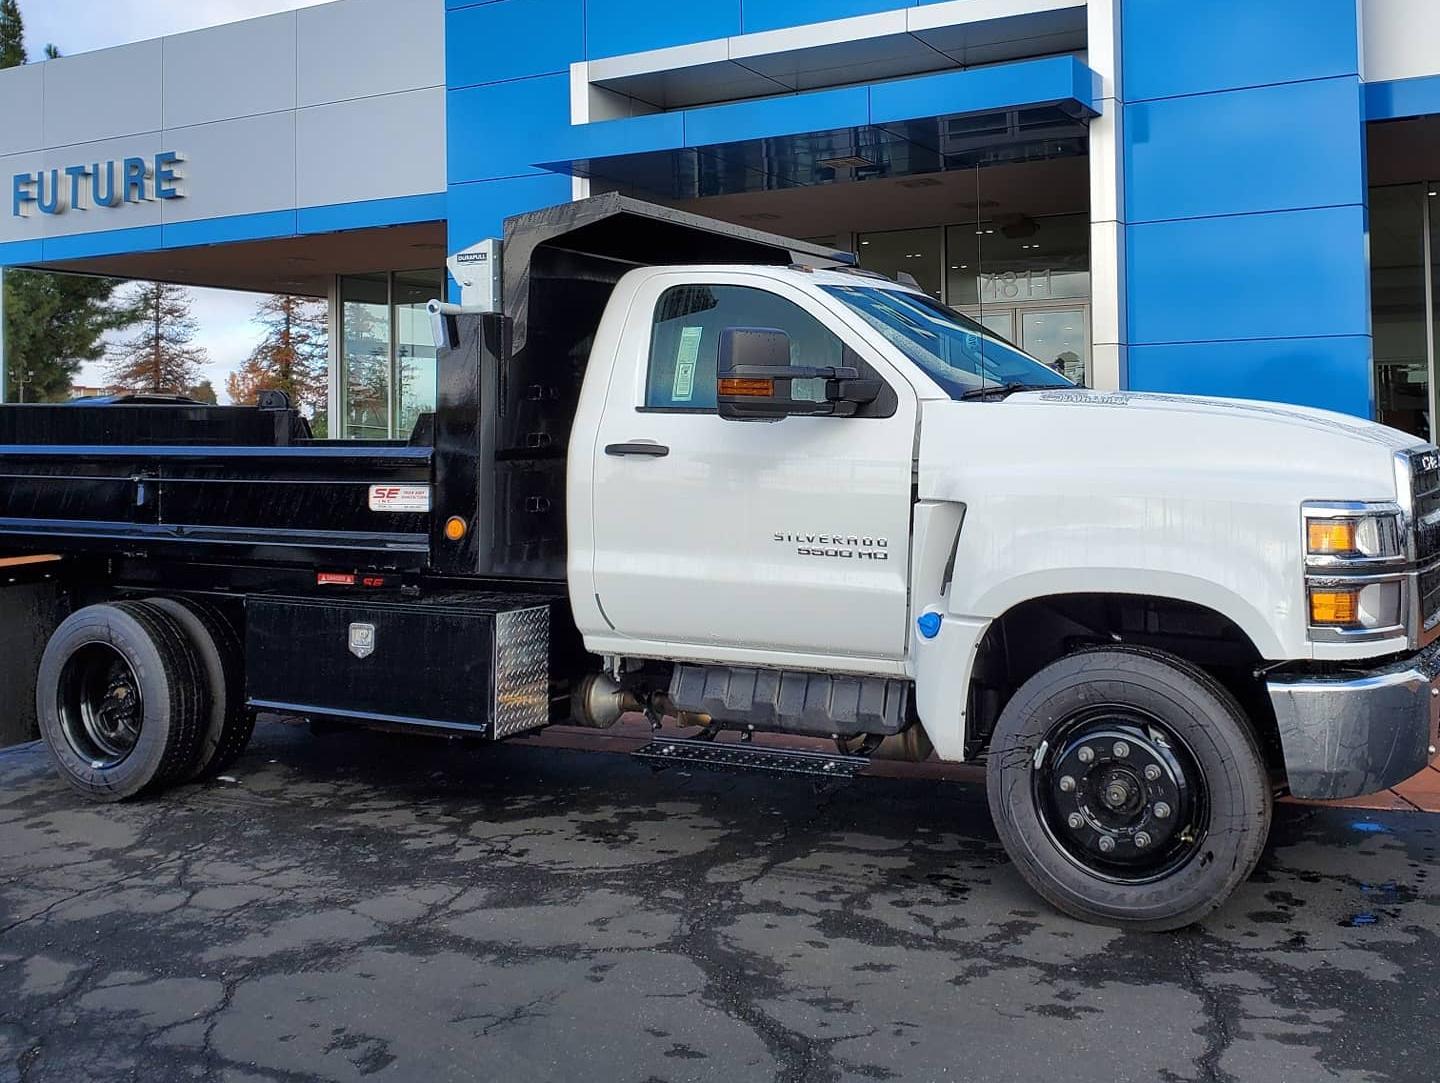 White Chevy Silverado 5500HD with Scelzi Dump Truck body, seen from the side in front of the Future Chevrolet Dealership